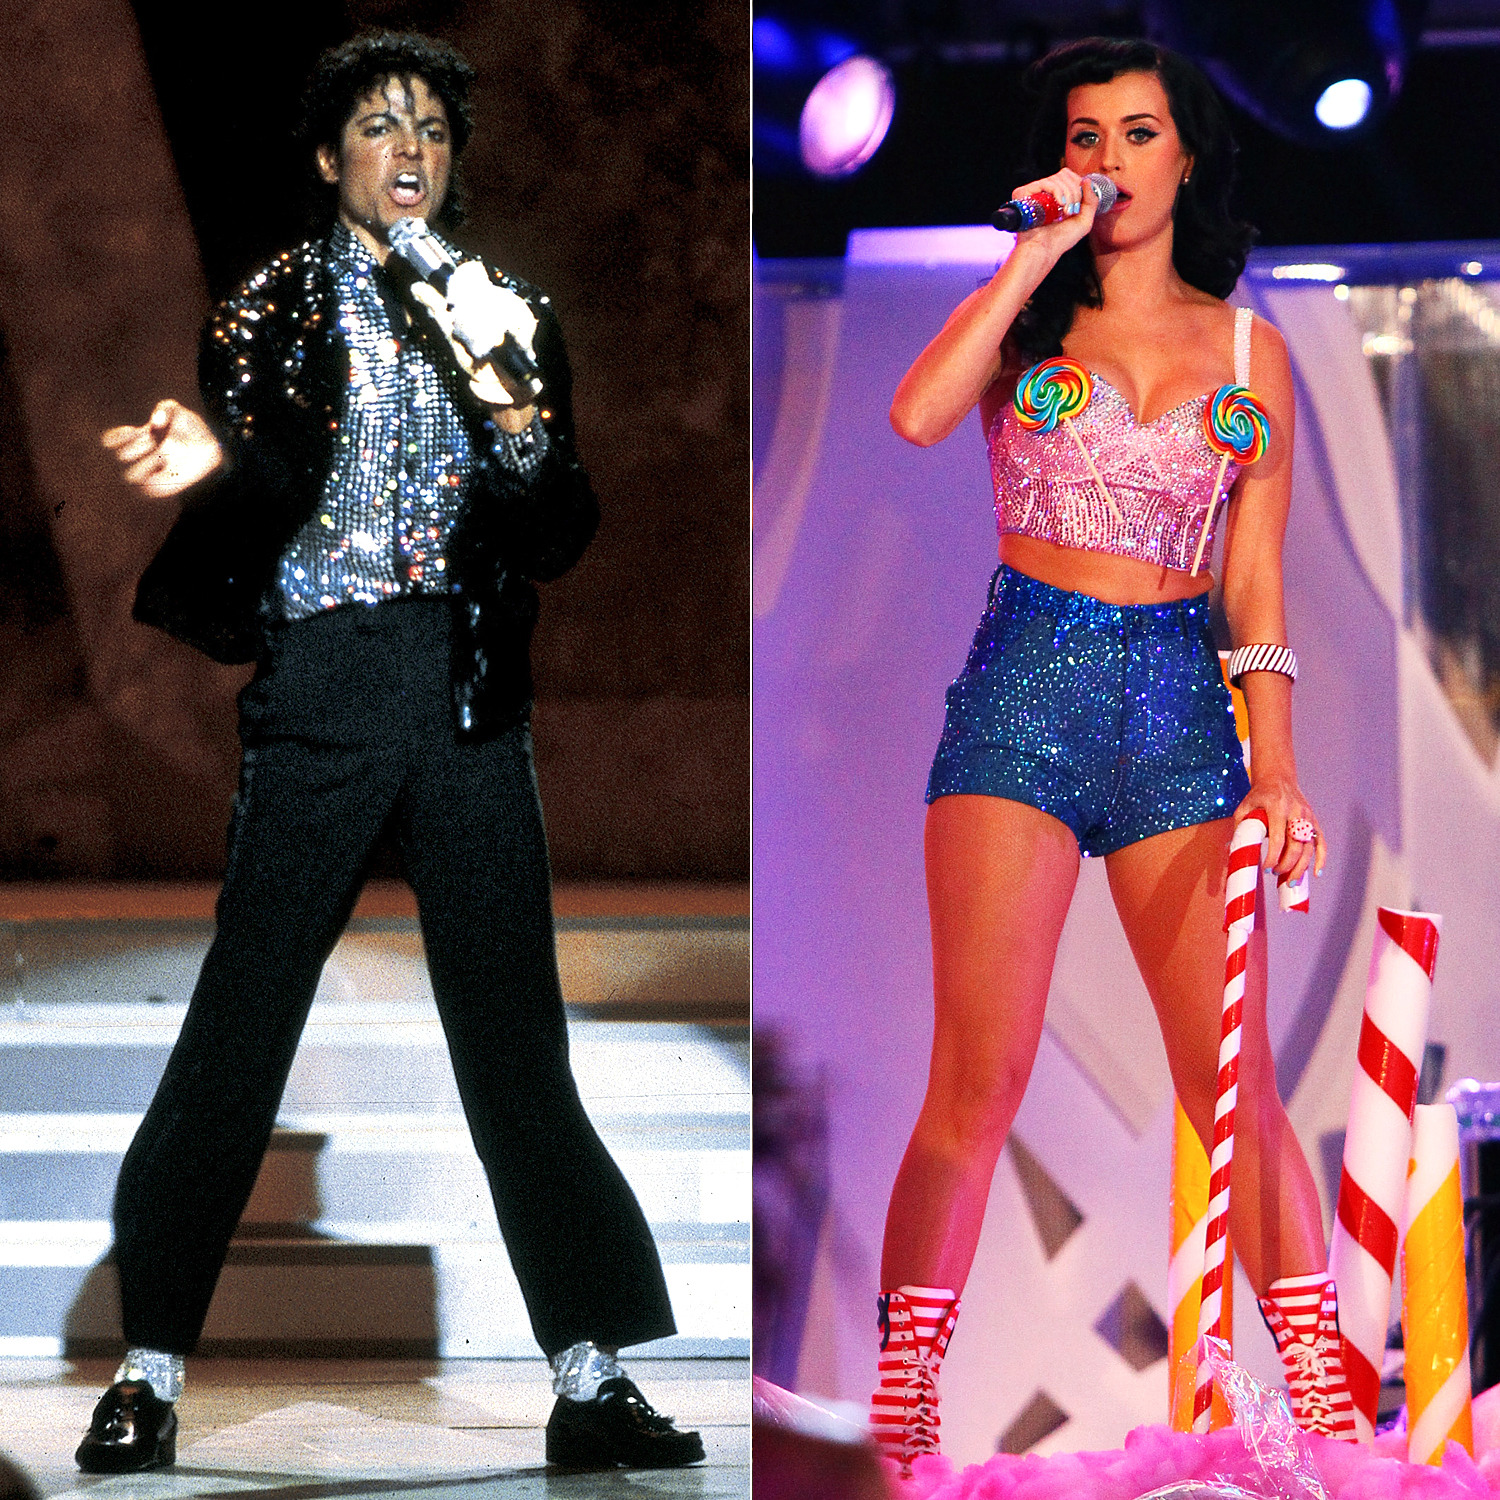 Michael Jackson Influenced 80s Fashion by His Jacket & Songs